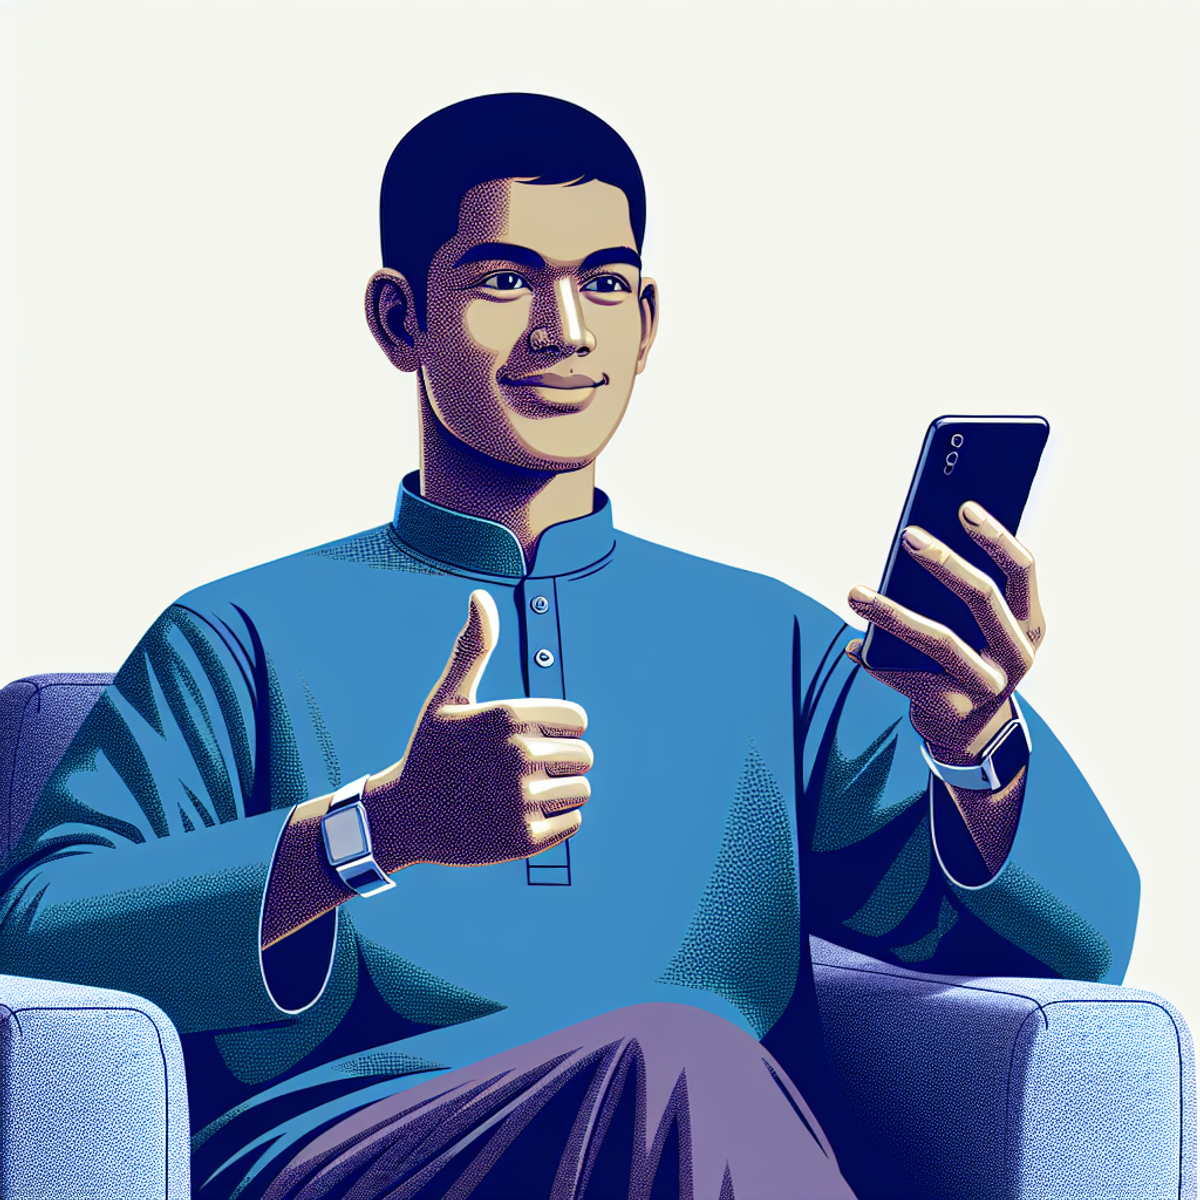 A person with brown skin and dark hair sits on a sofa, holding a smartphone in one hand and making a thumbs-up gesture with the other.